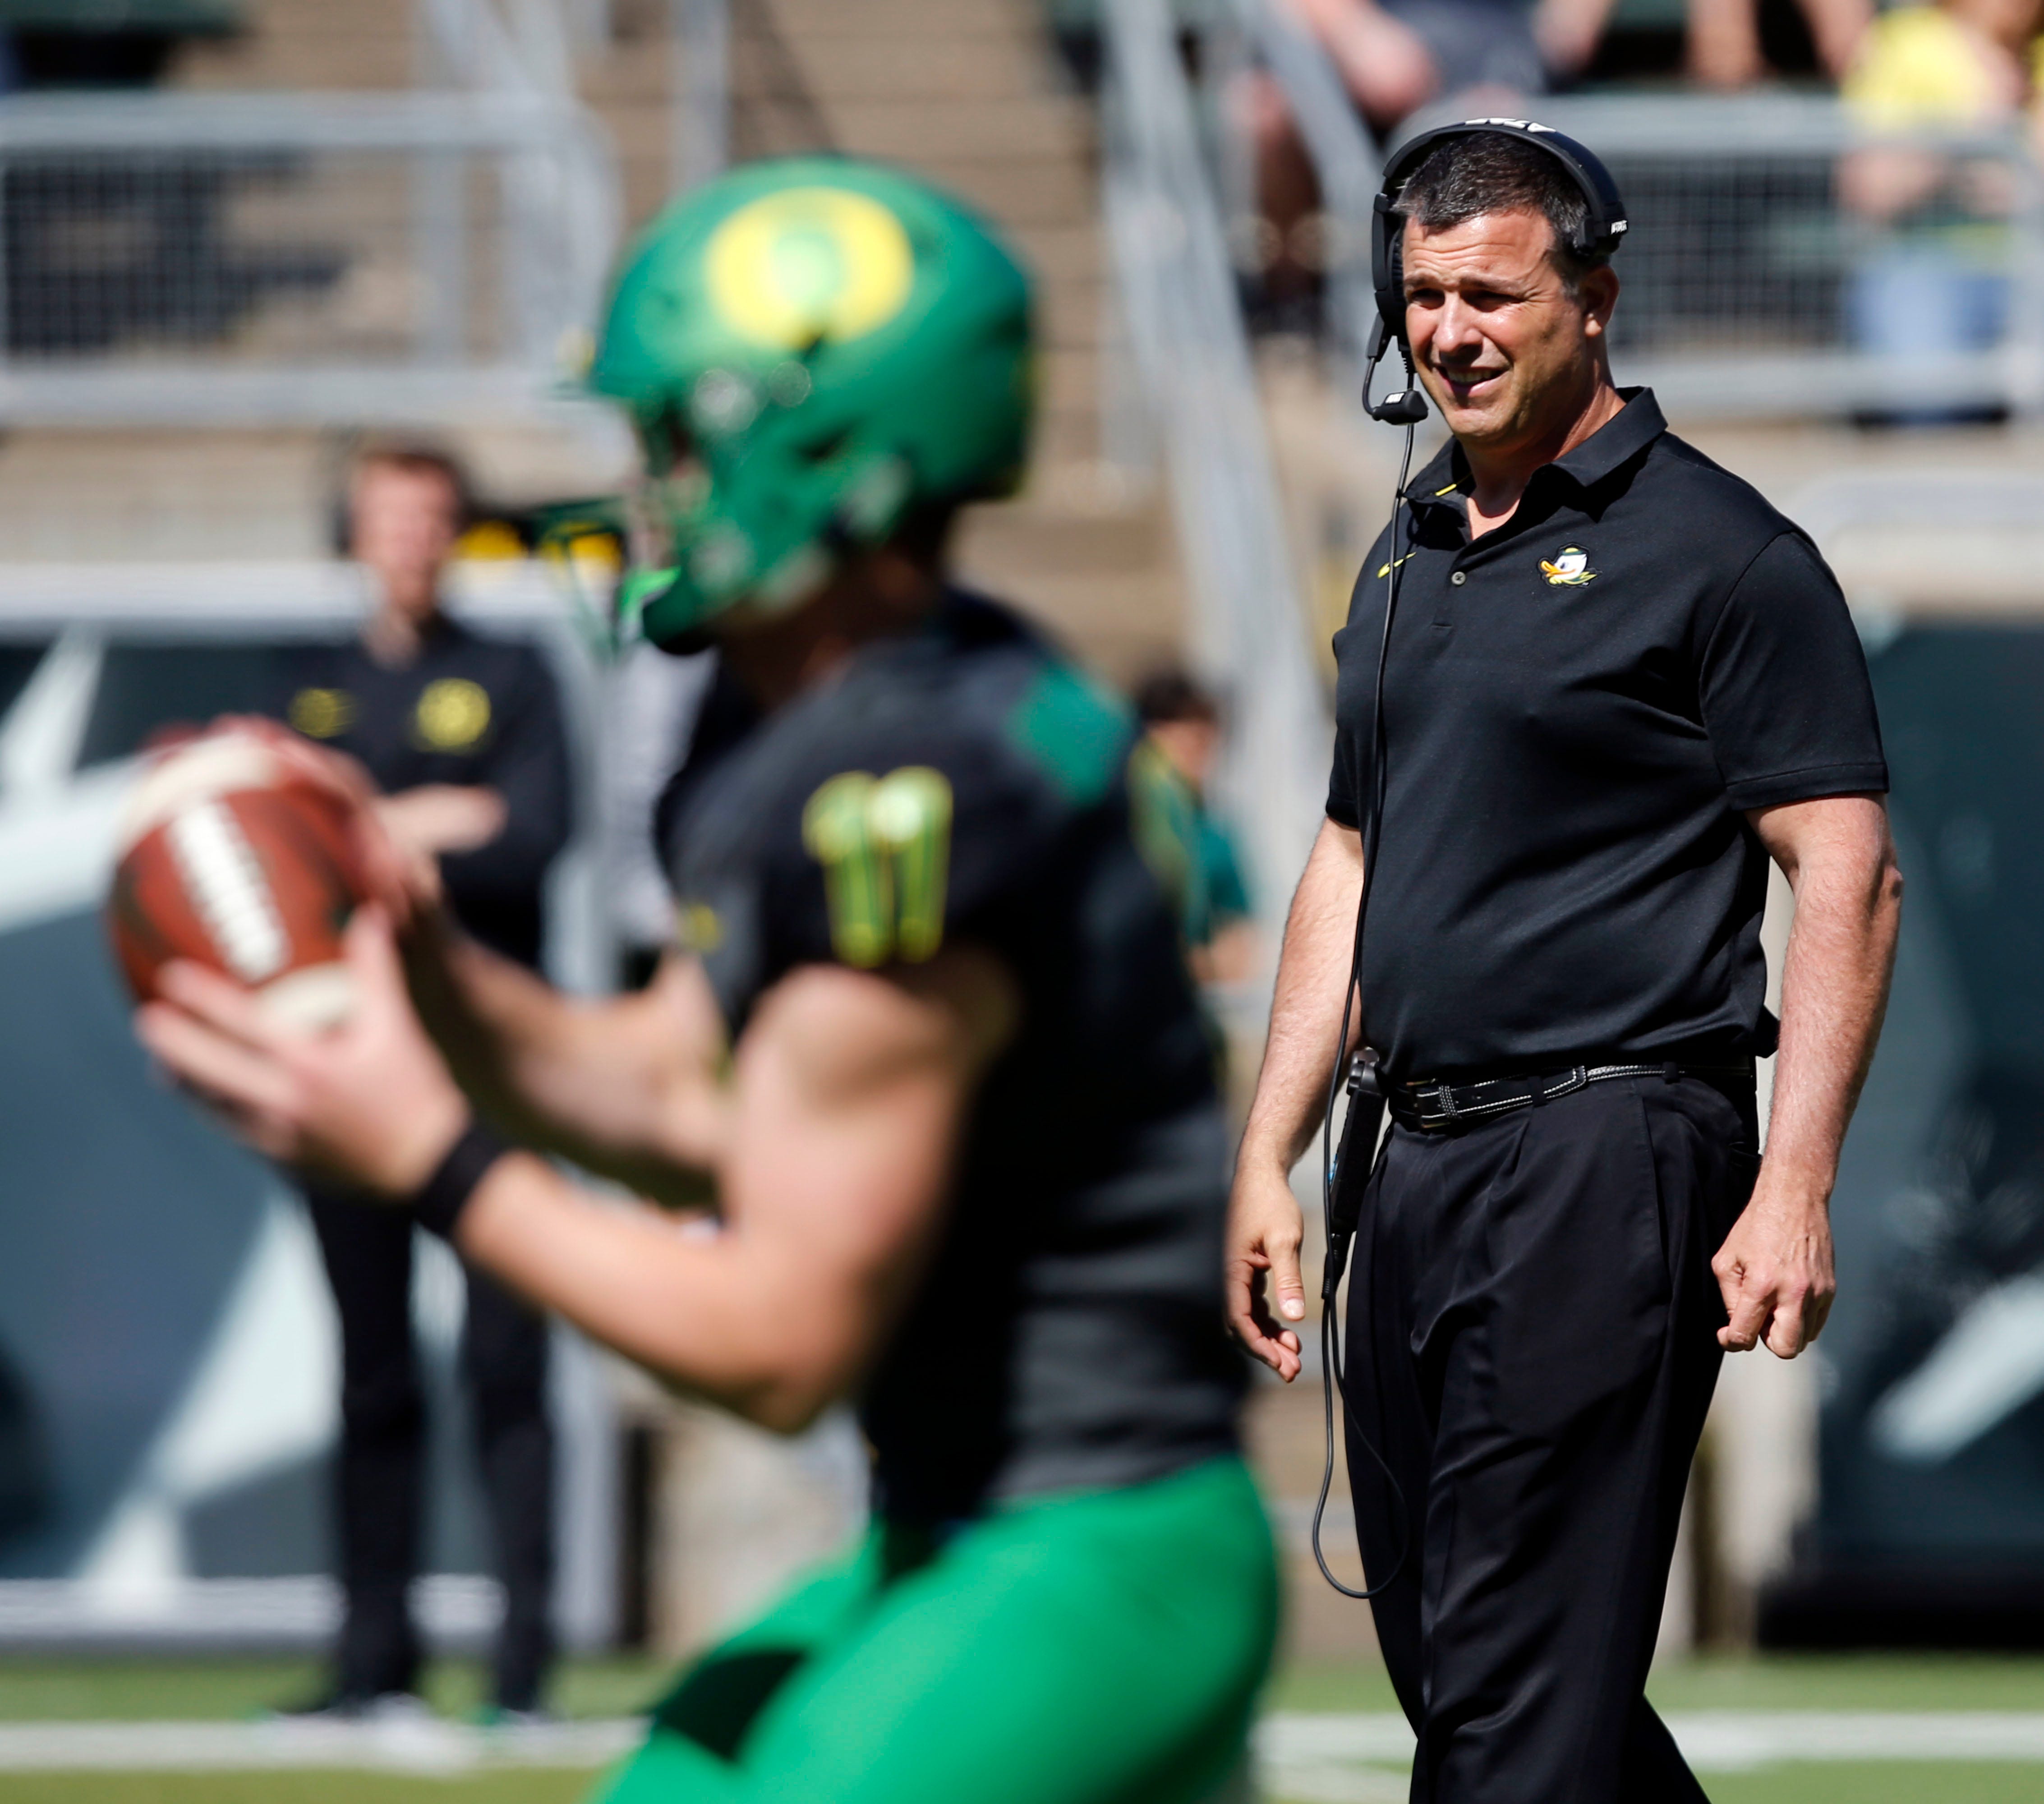 Coach Mario Cristobal, after Oregon's rise and fall, aims to lead Ducks back to the top